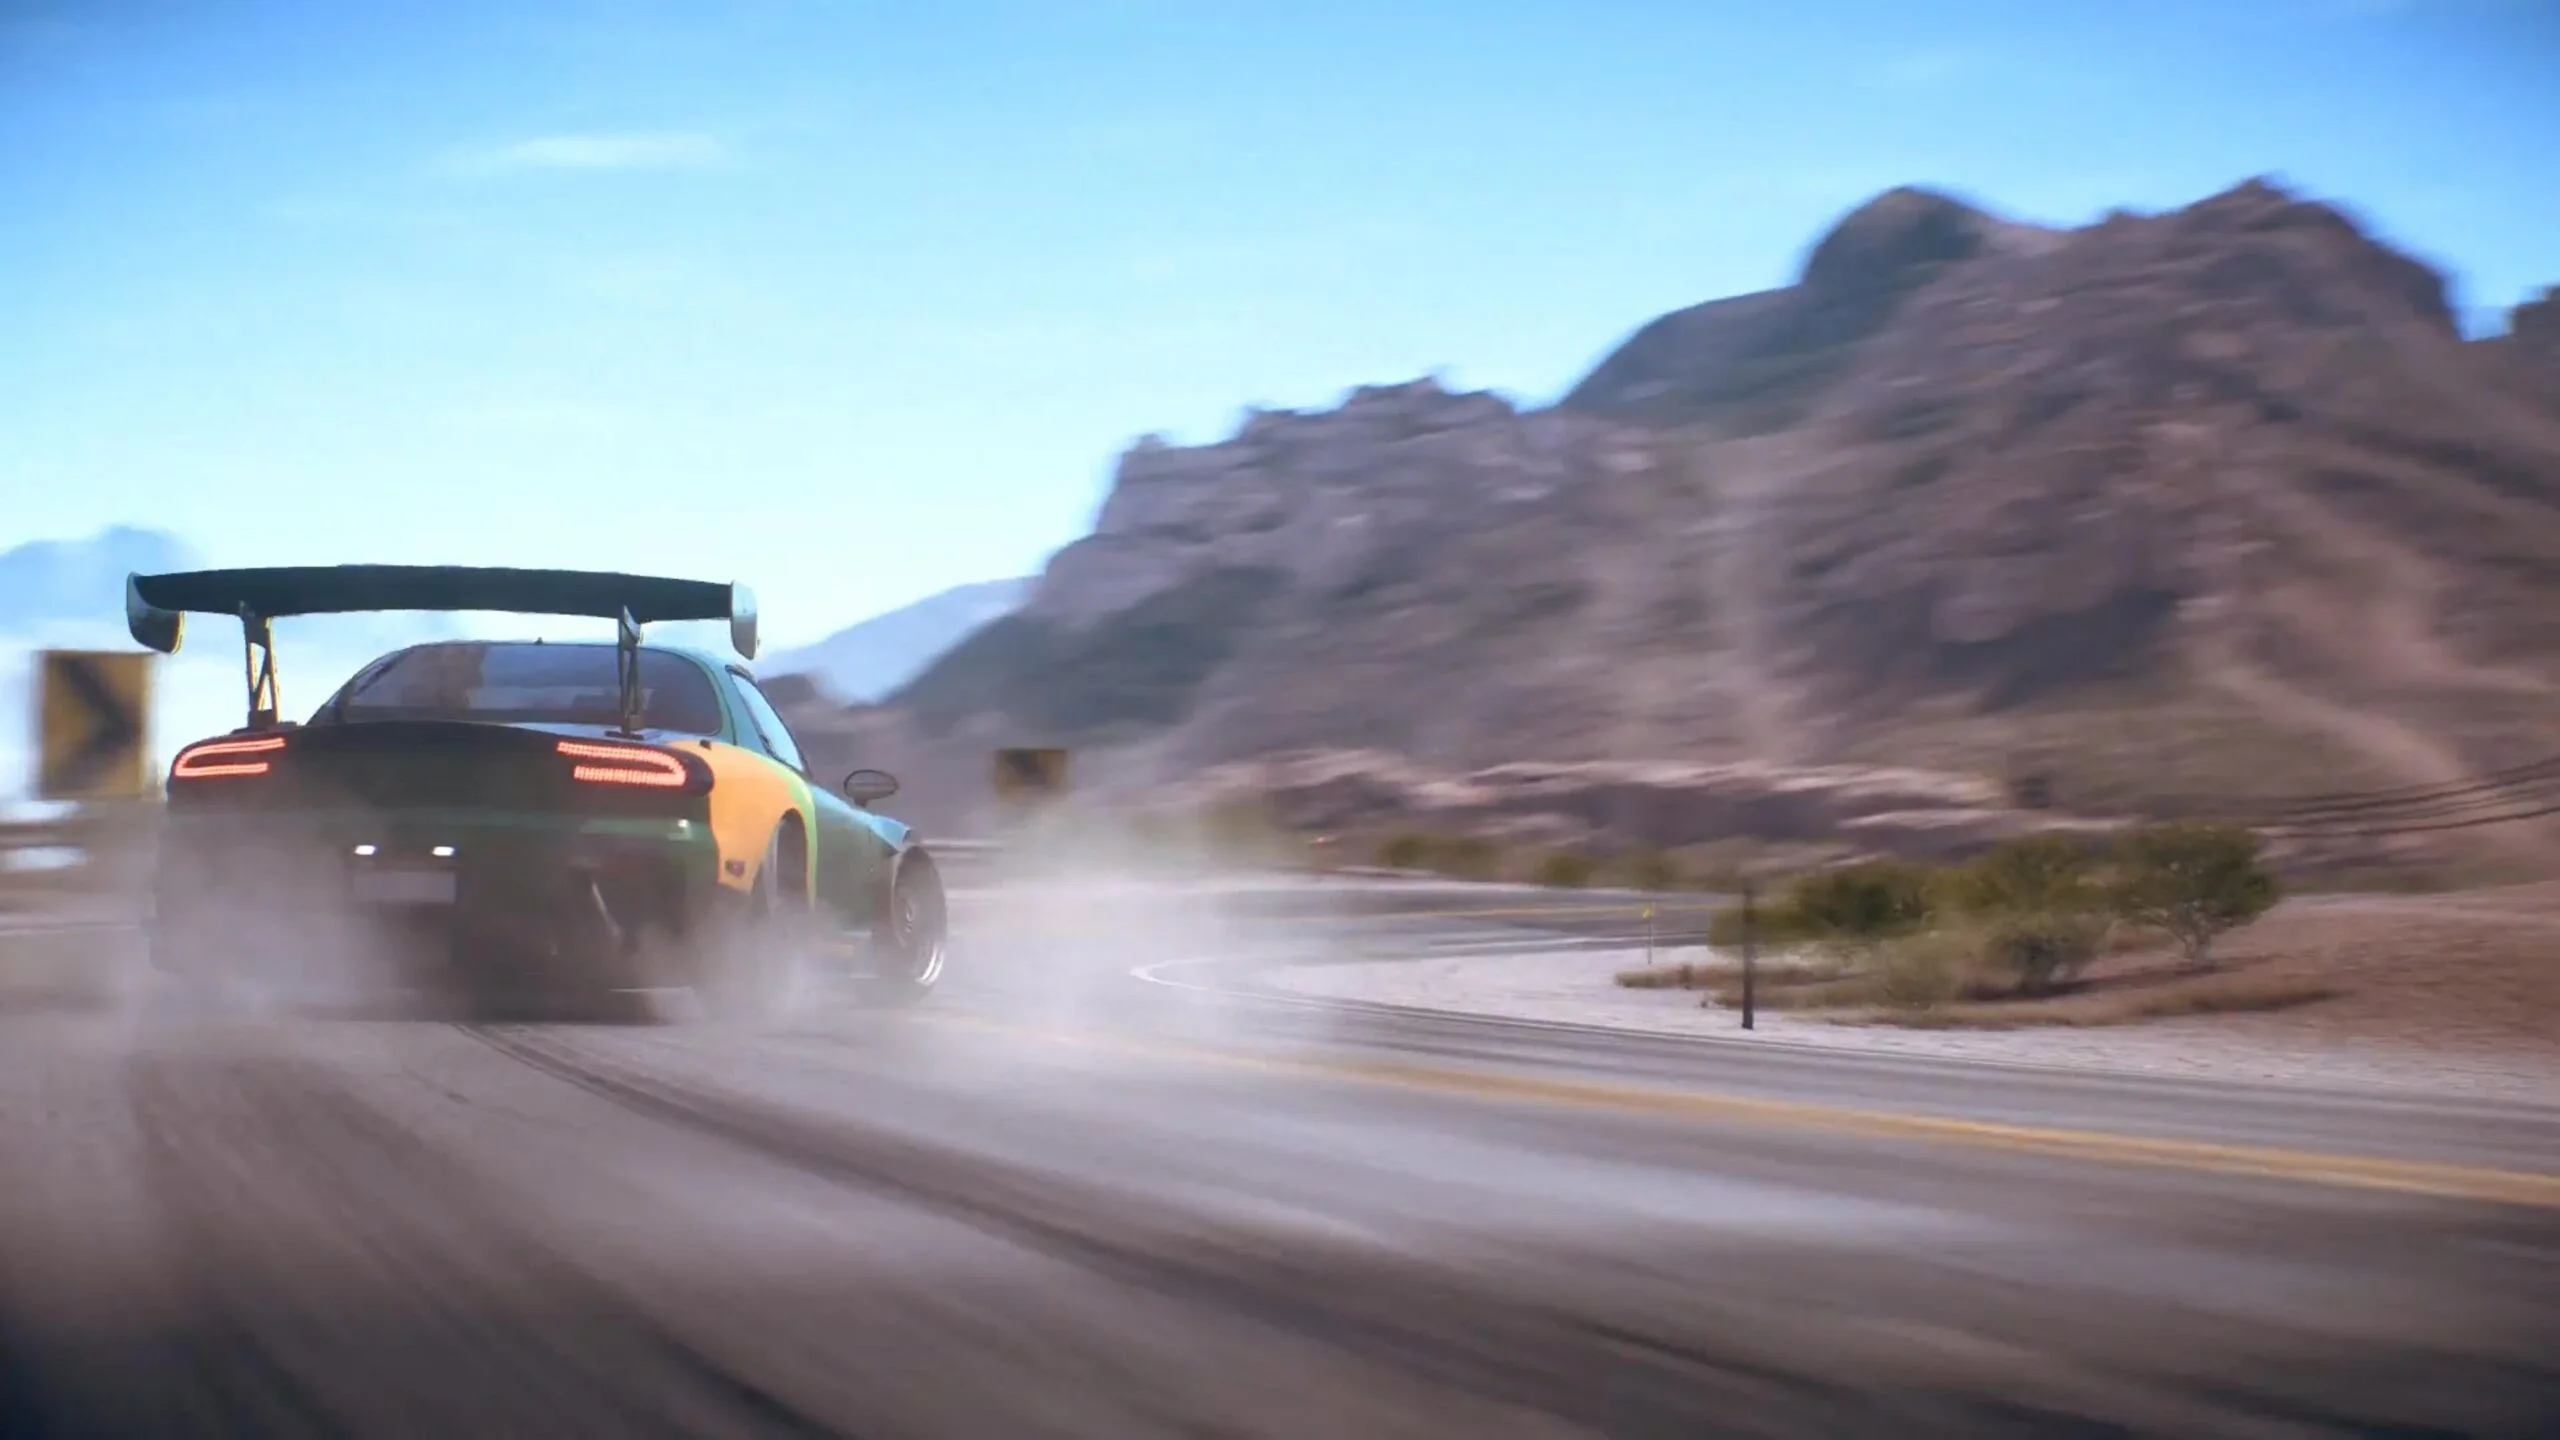 Need For Speed Payback Review - GameSpot